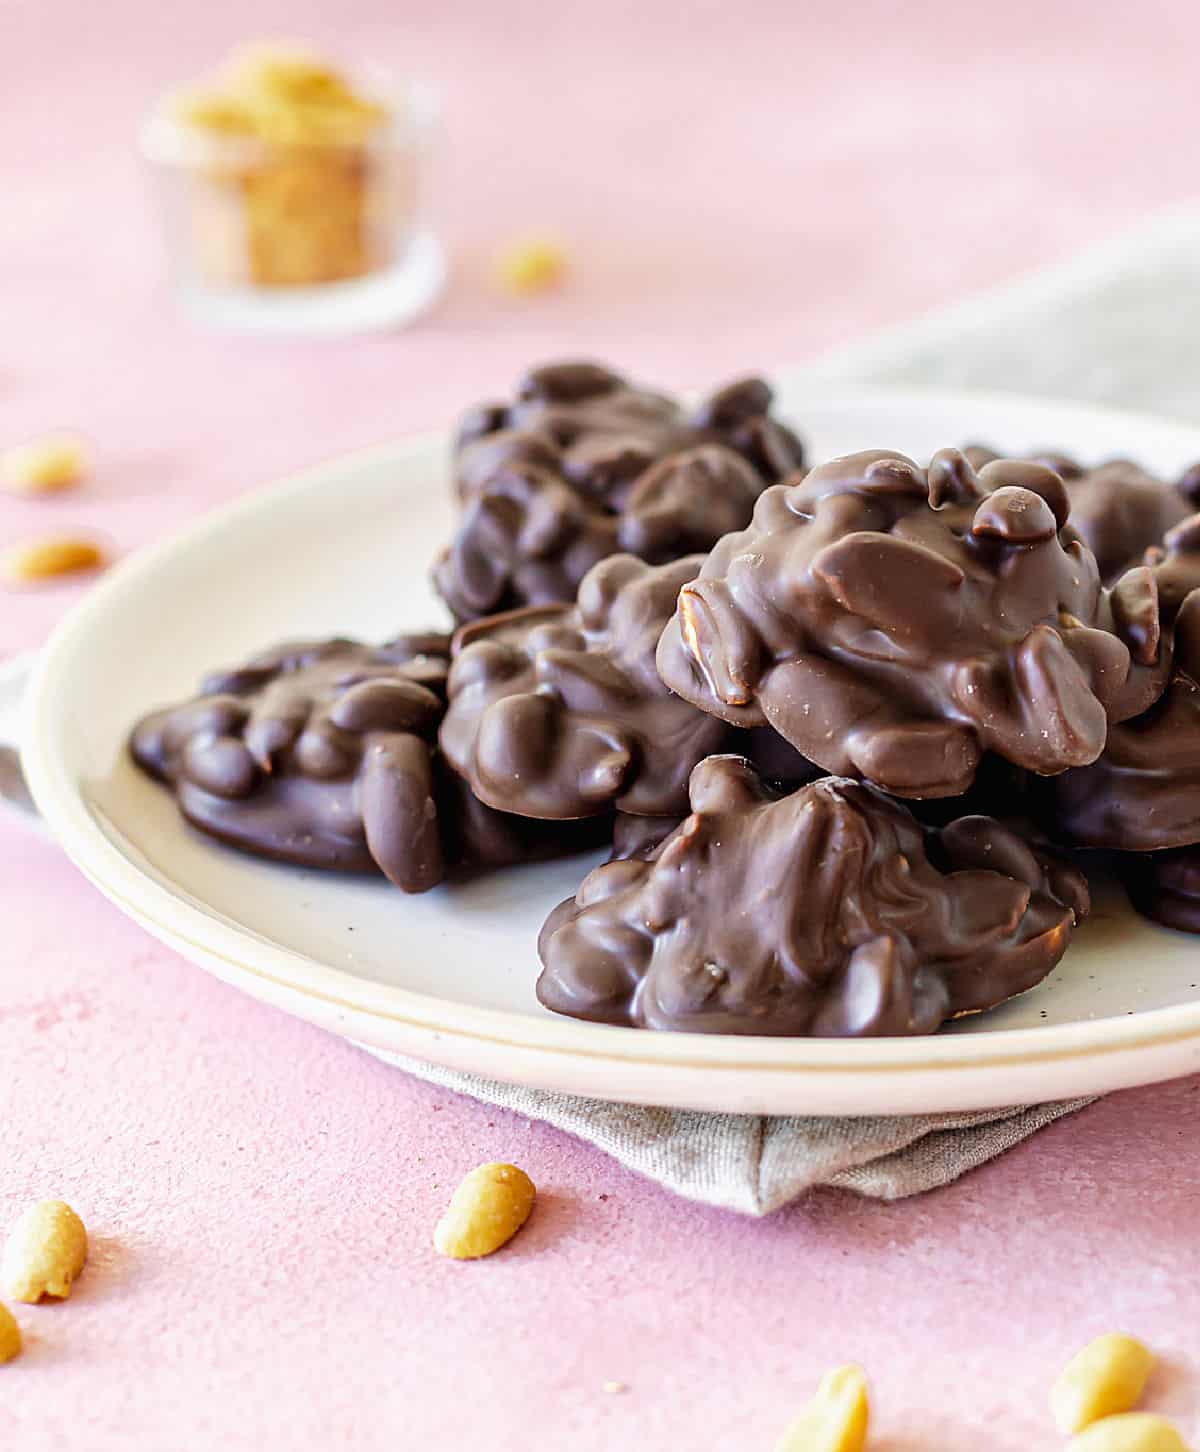 White plate with chocolate peanut clusters on pink surface, peanuts around